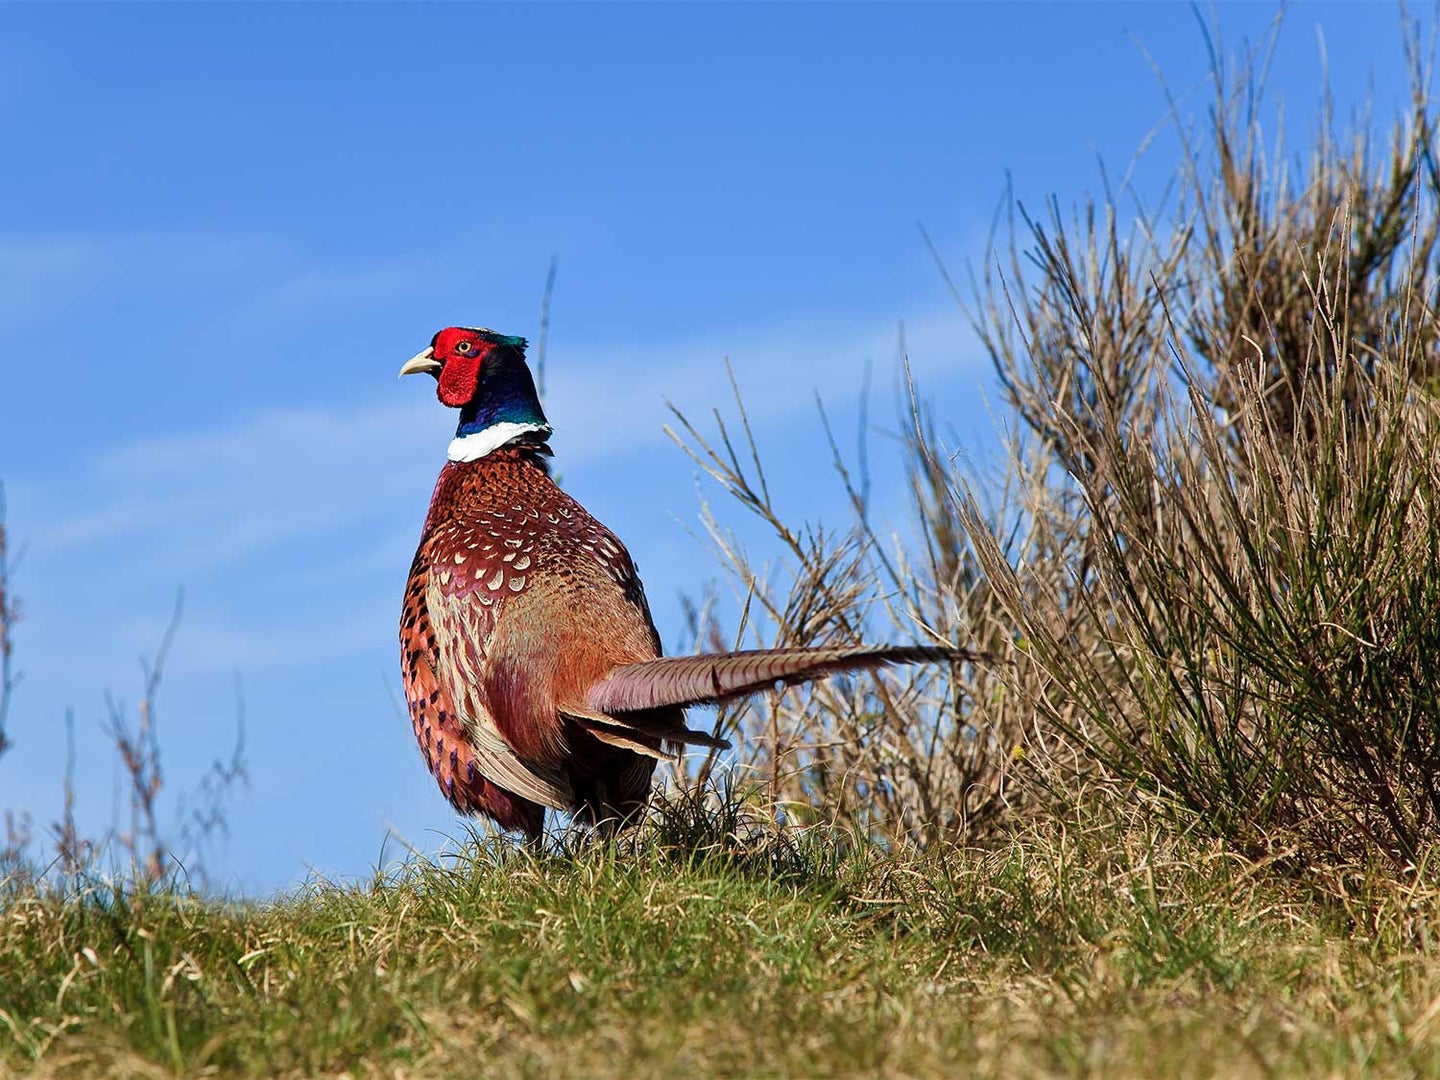 a pheasant out in the field